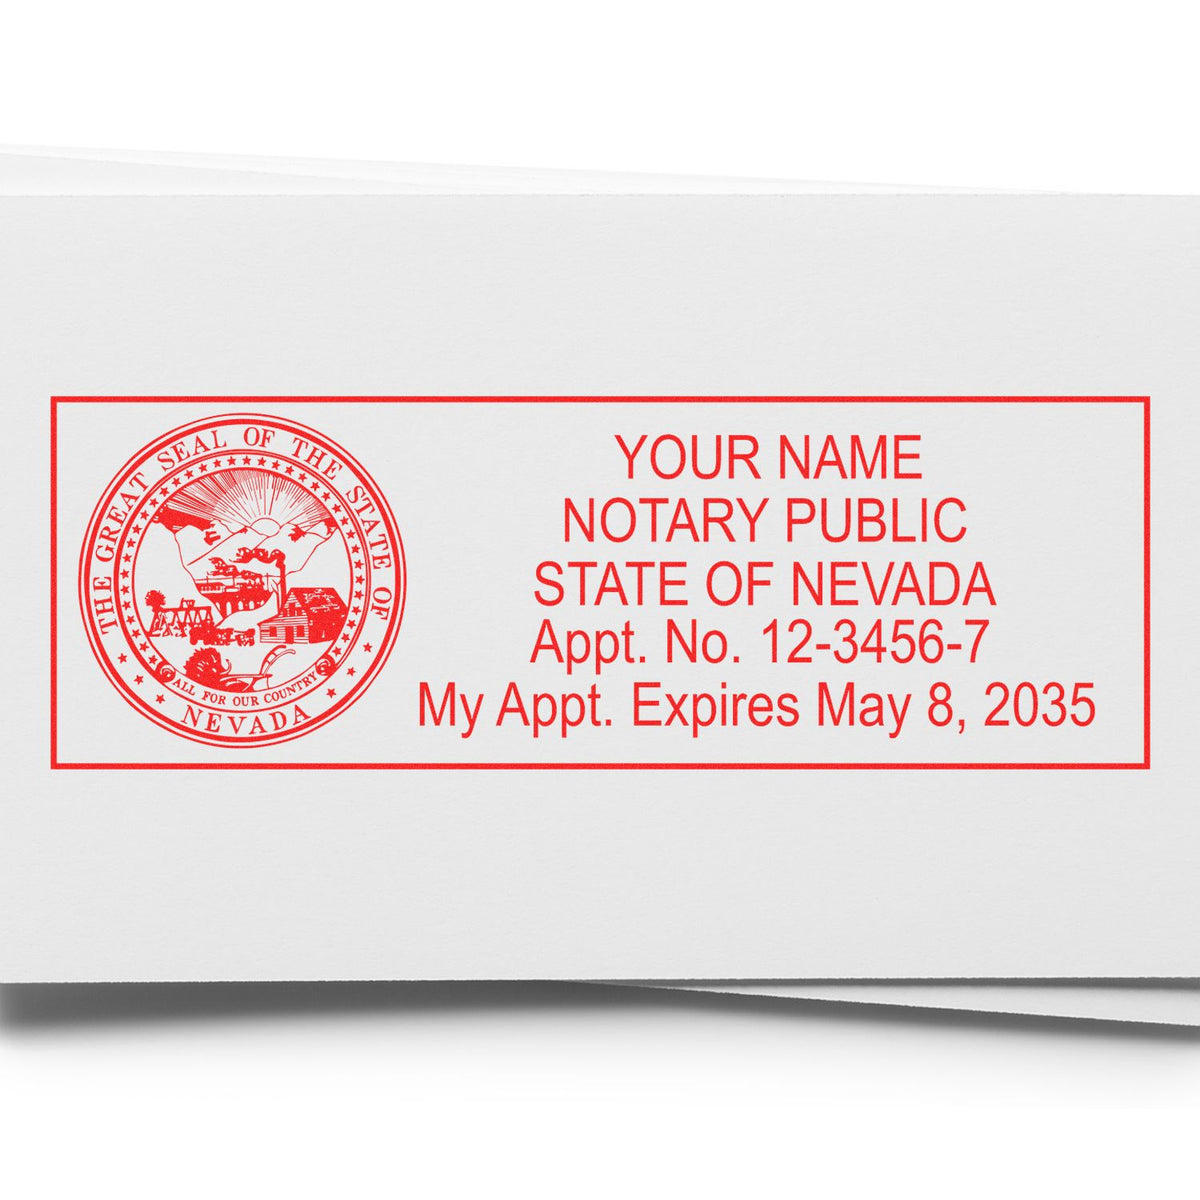 A stamped impression of the PSI Nevada Notary Stamp in this stylish lifestyle photo, setting the tone for a unique and personalized product.